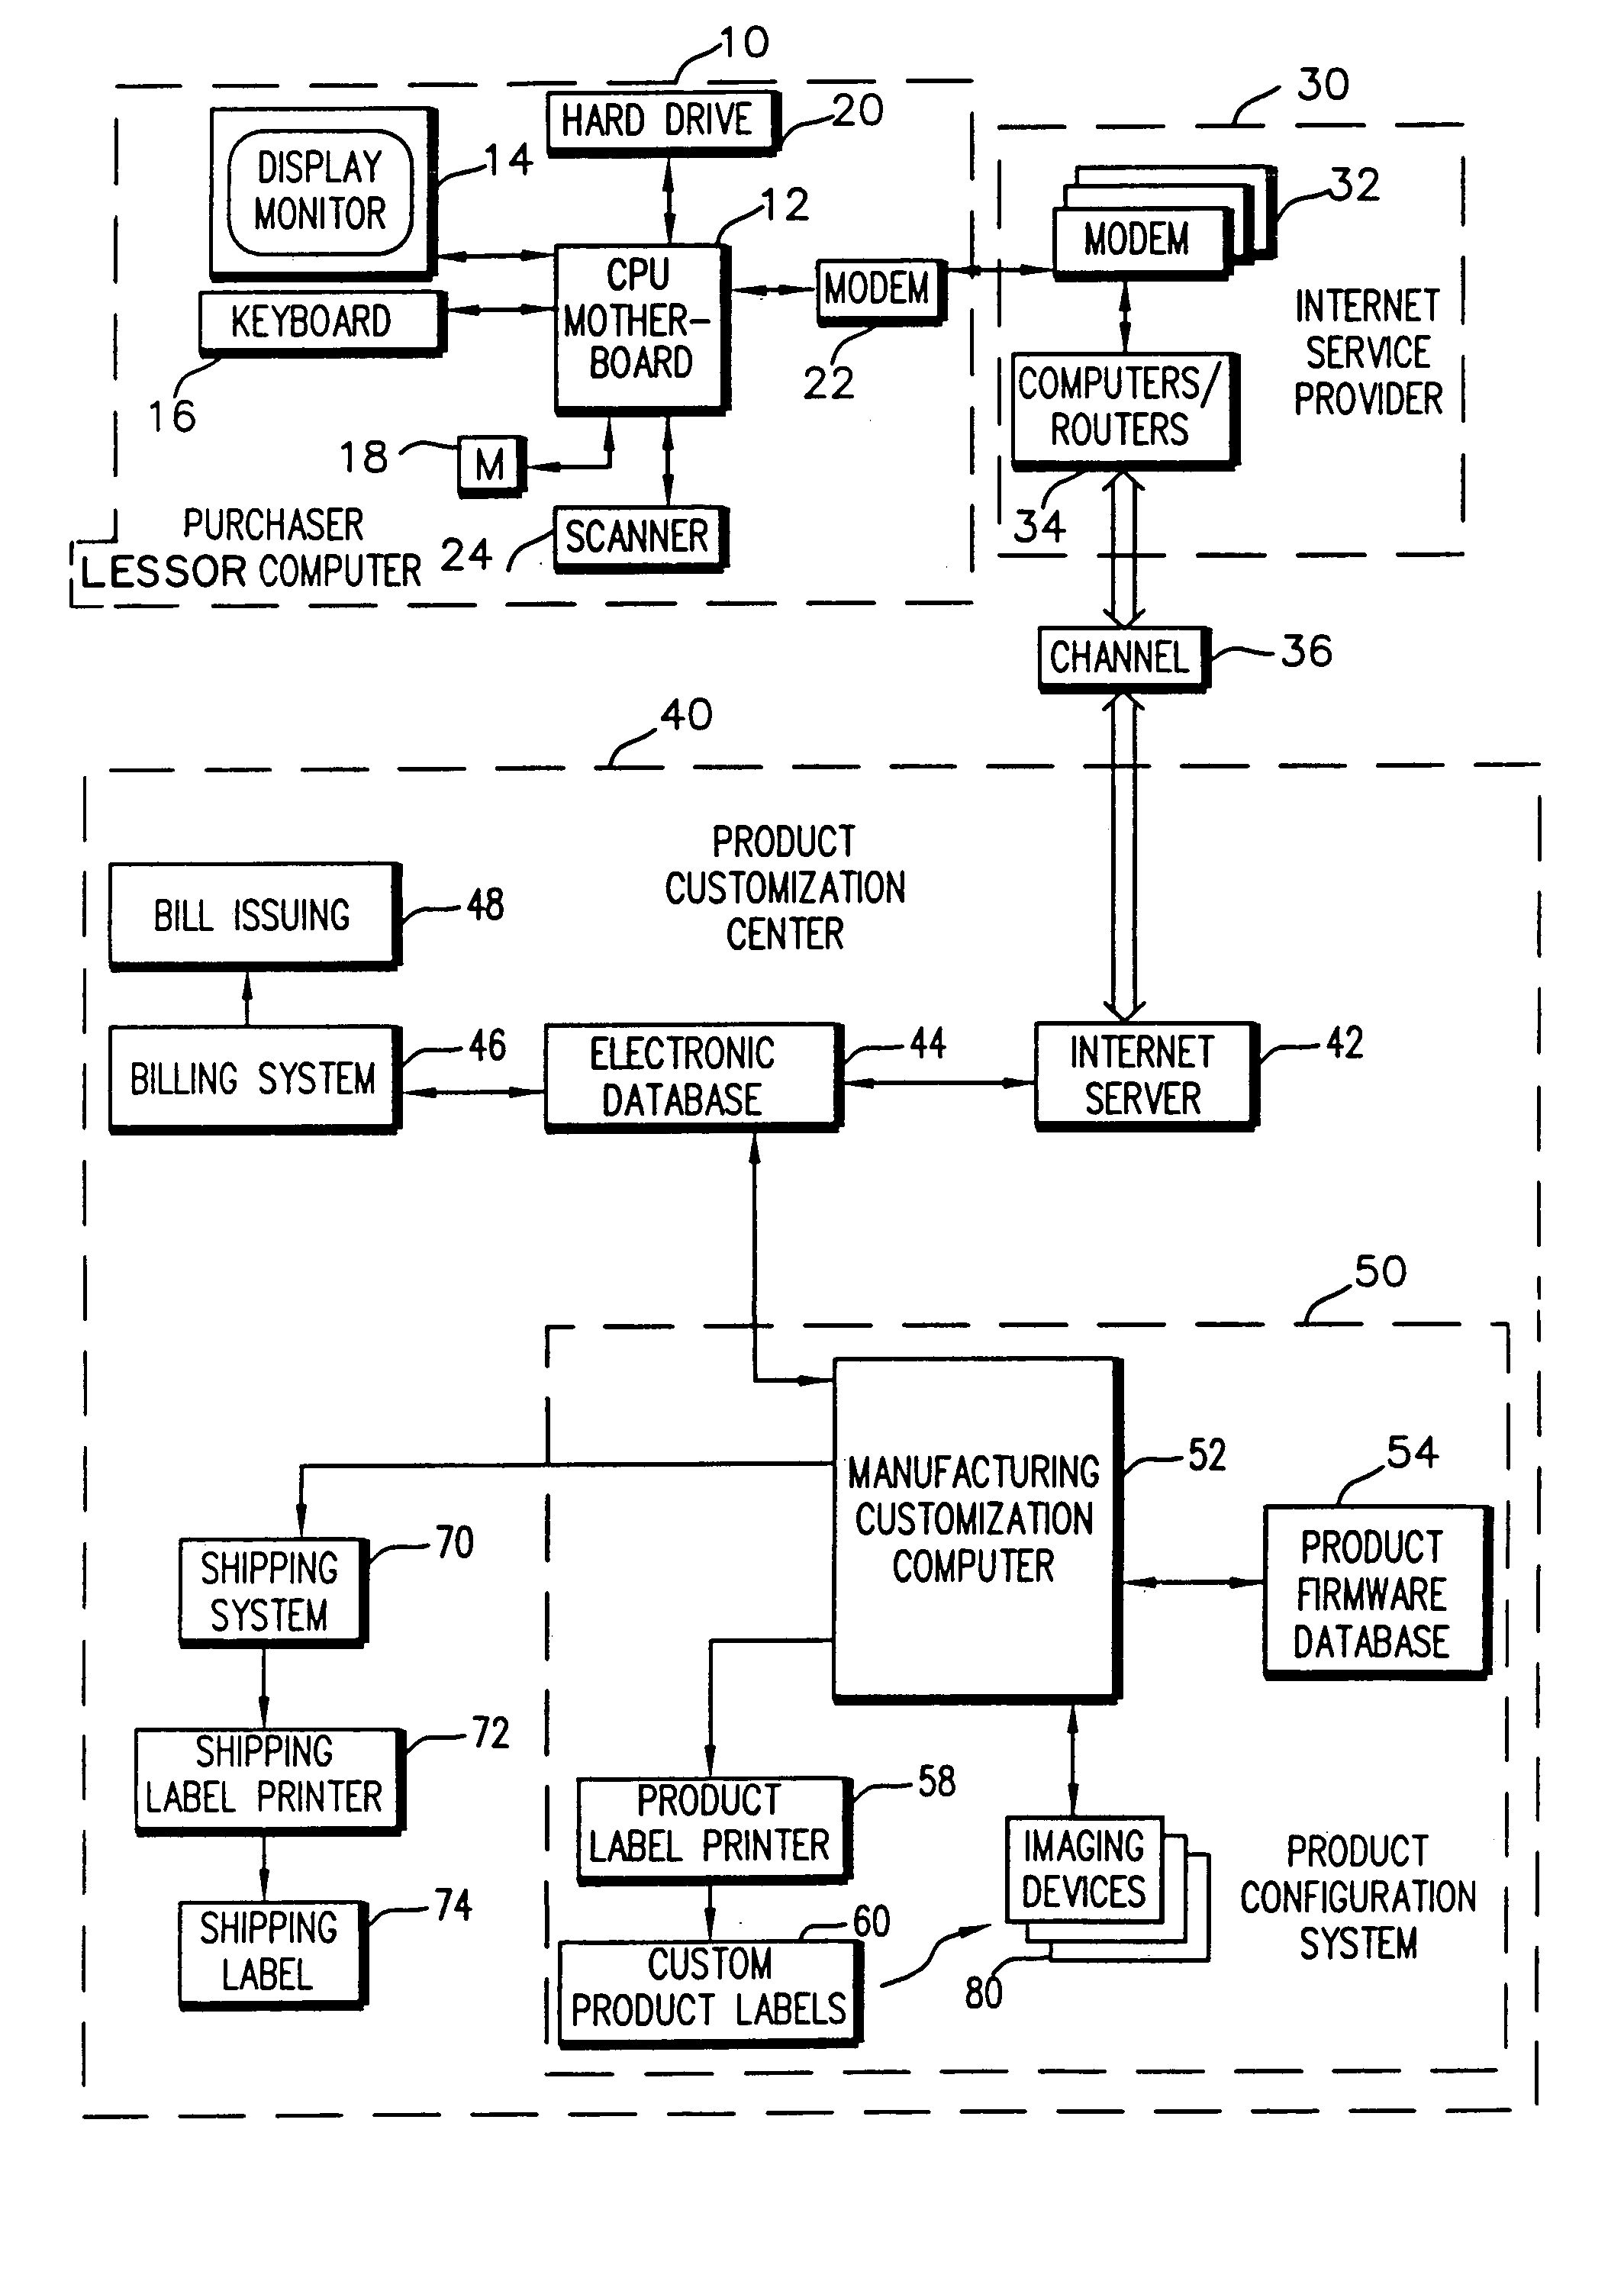 System and method for providing image products and/or services